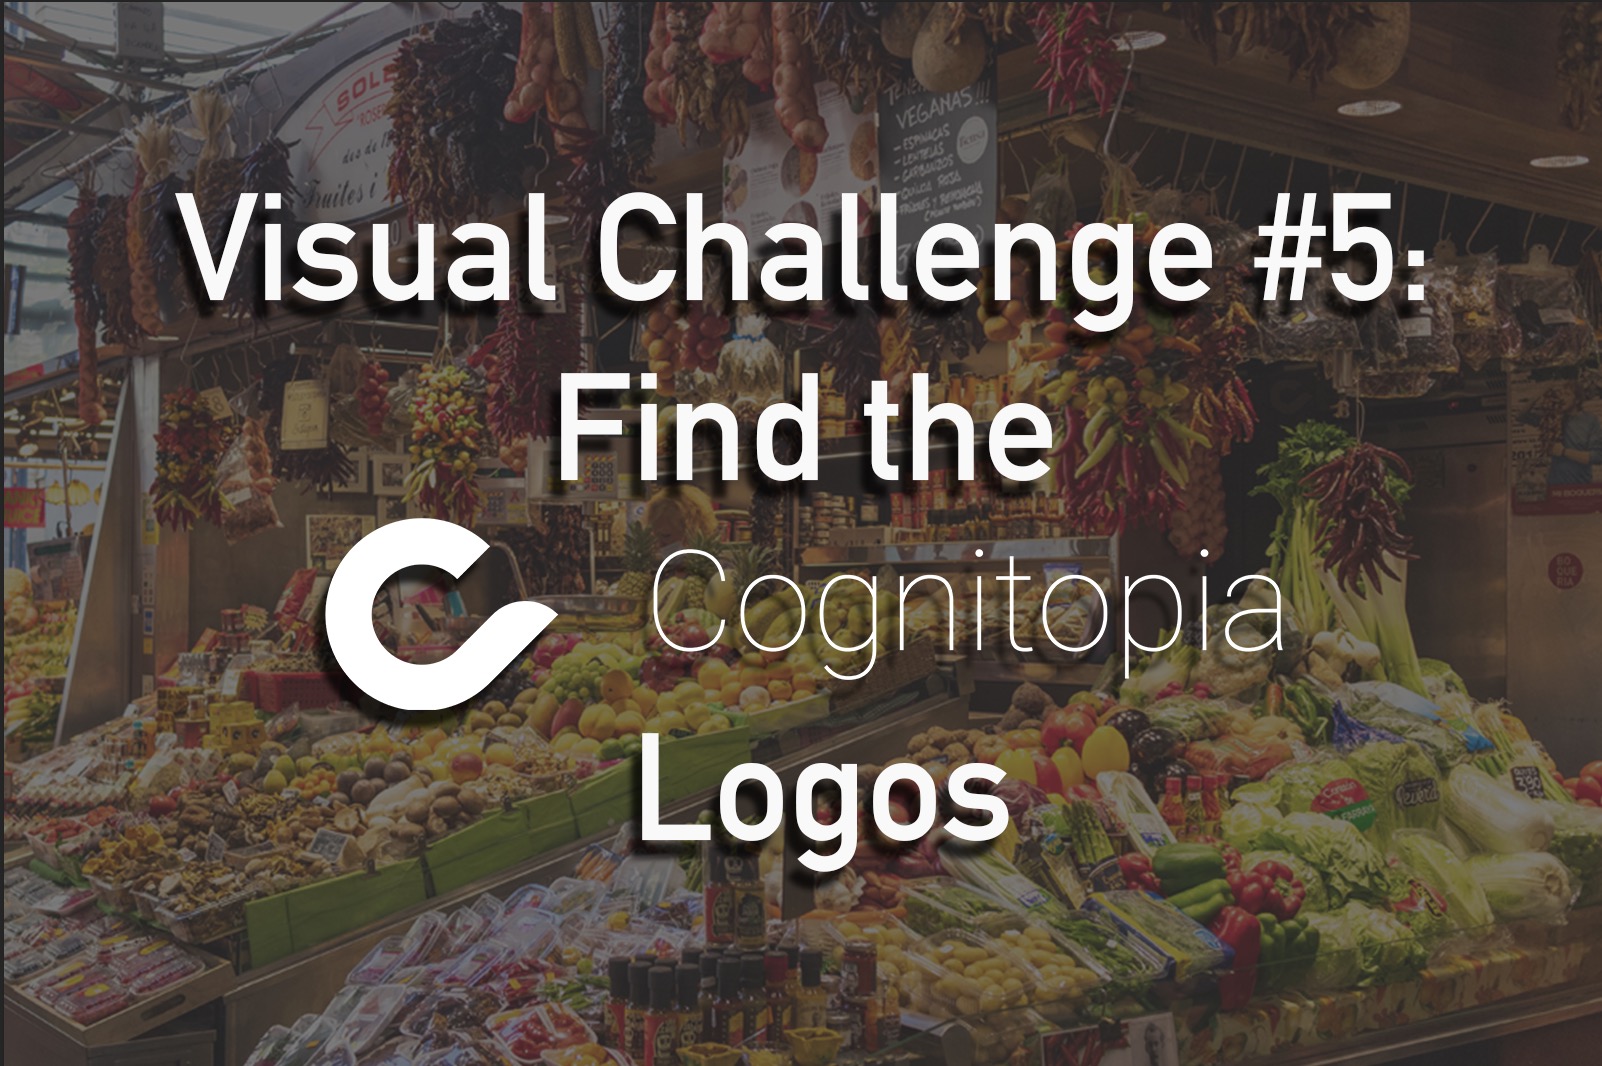 the featured image for cognitopias fifth visual challenge puzzle series